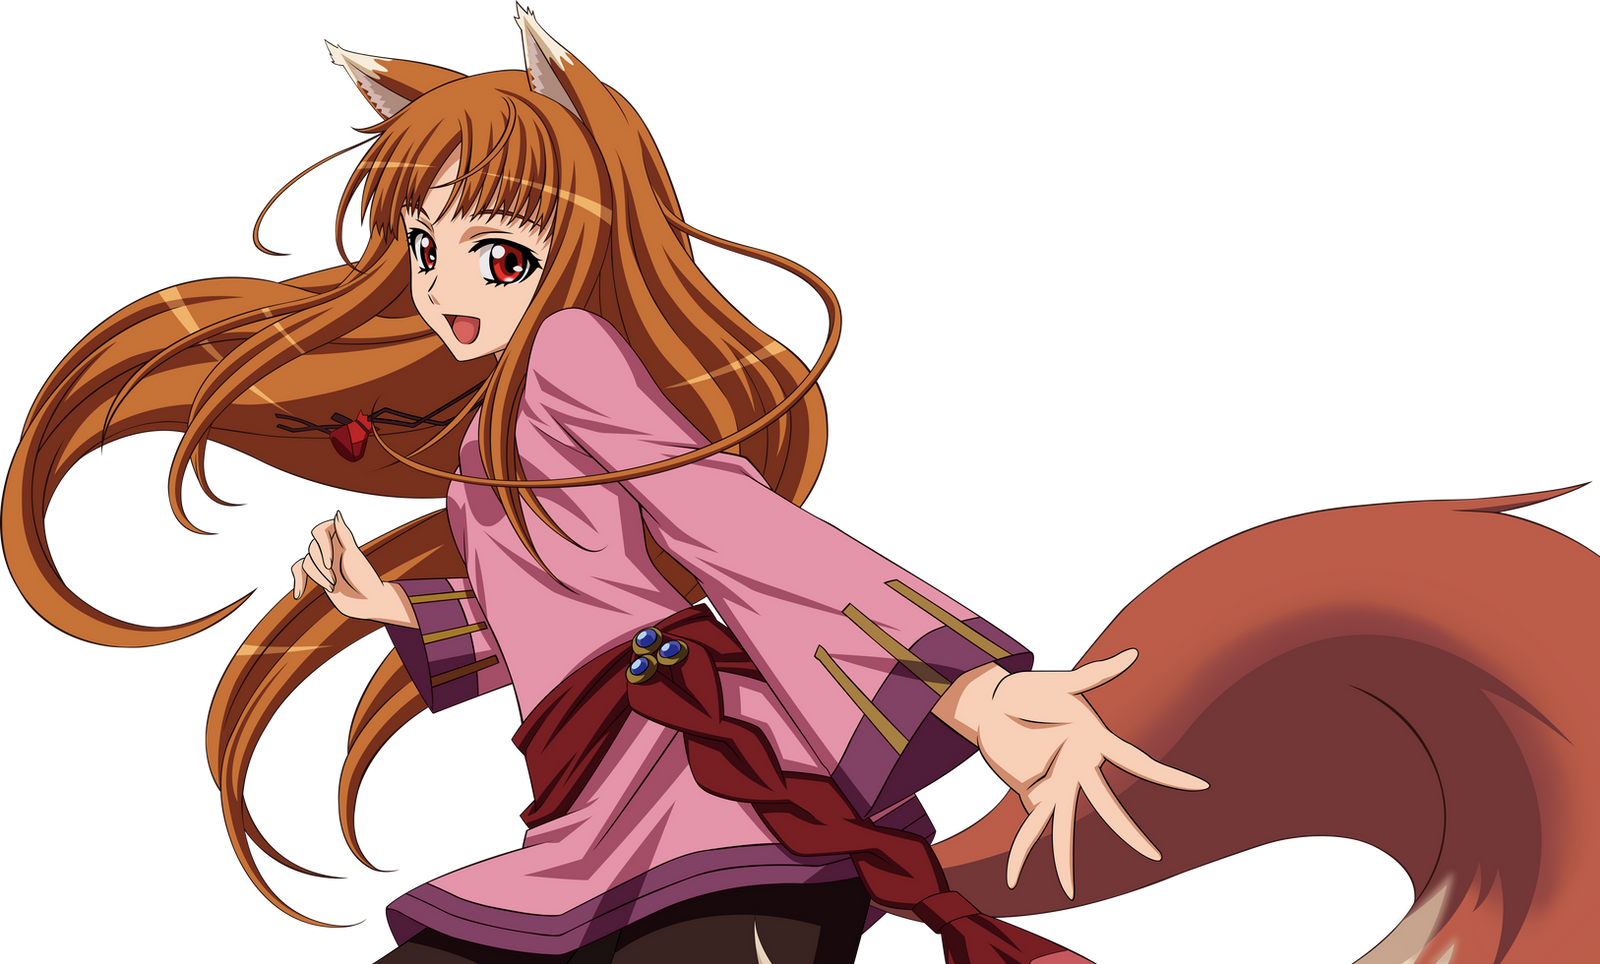 holo___spice_and_wolf_by_ergheiz33-d429b41.png